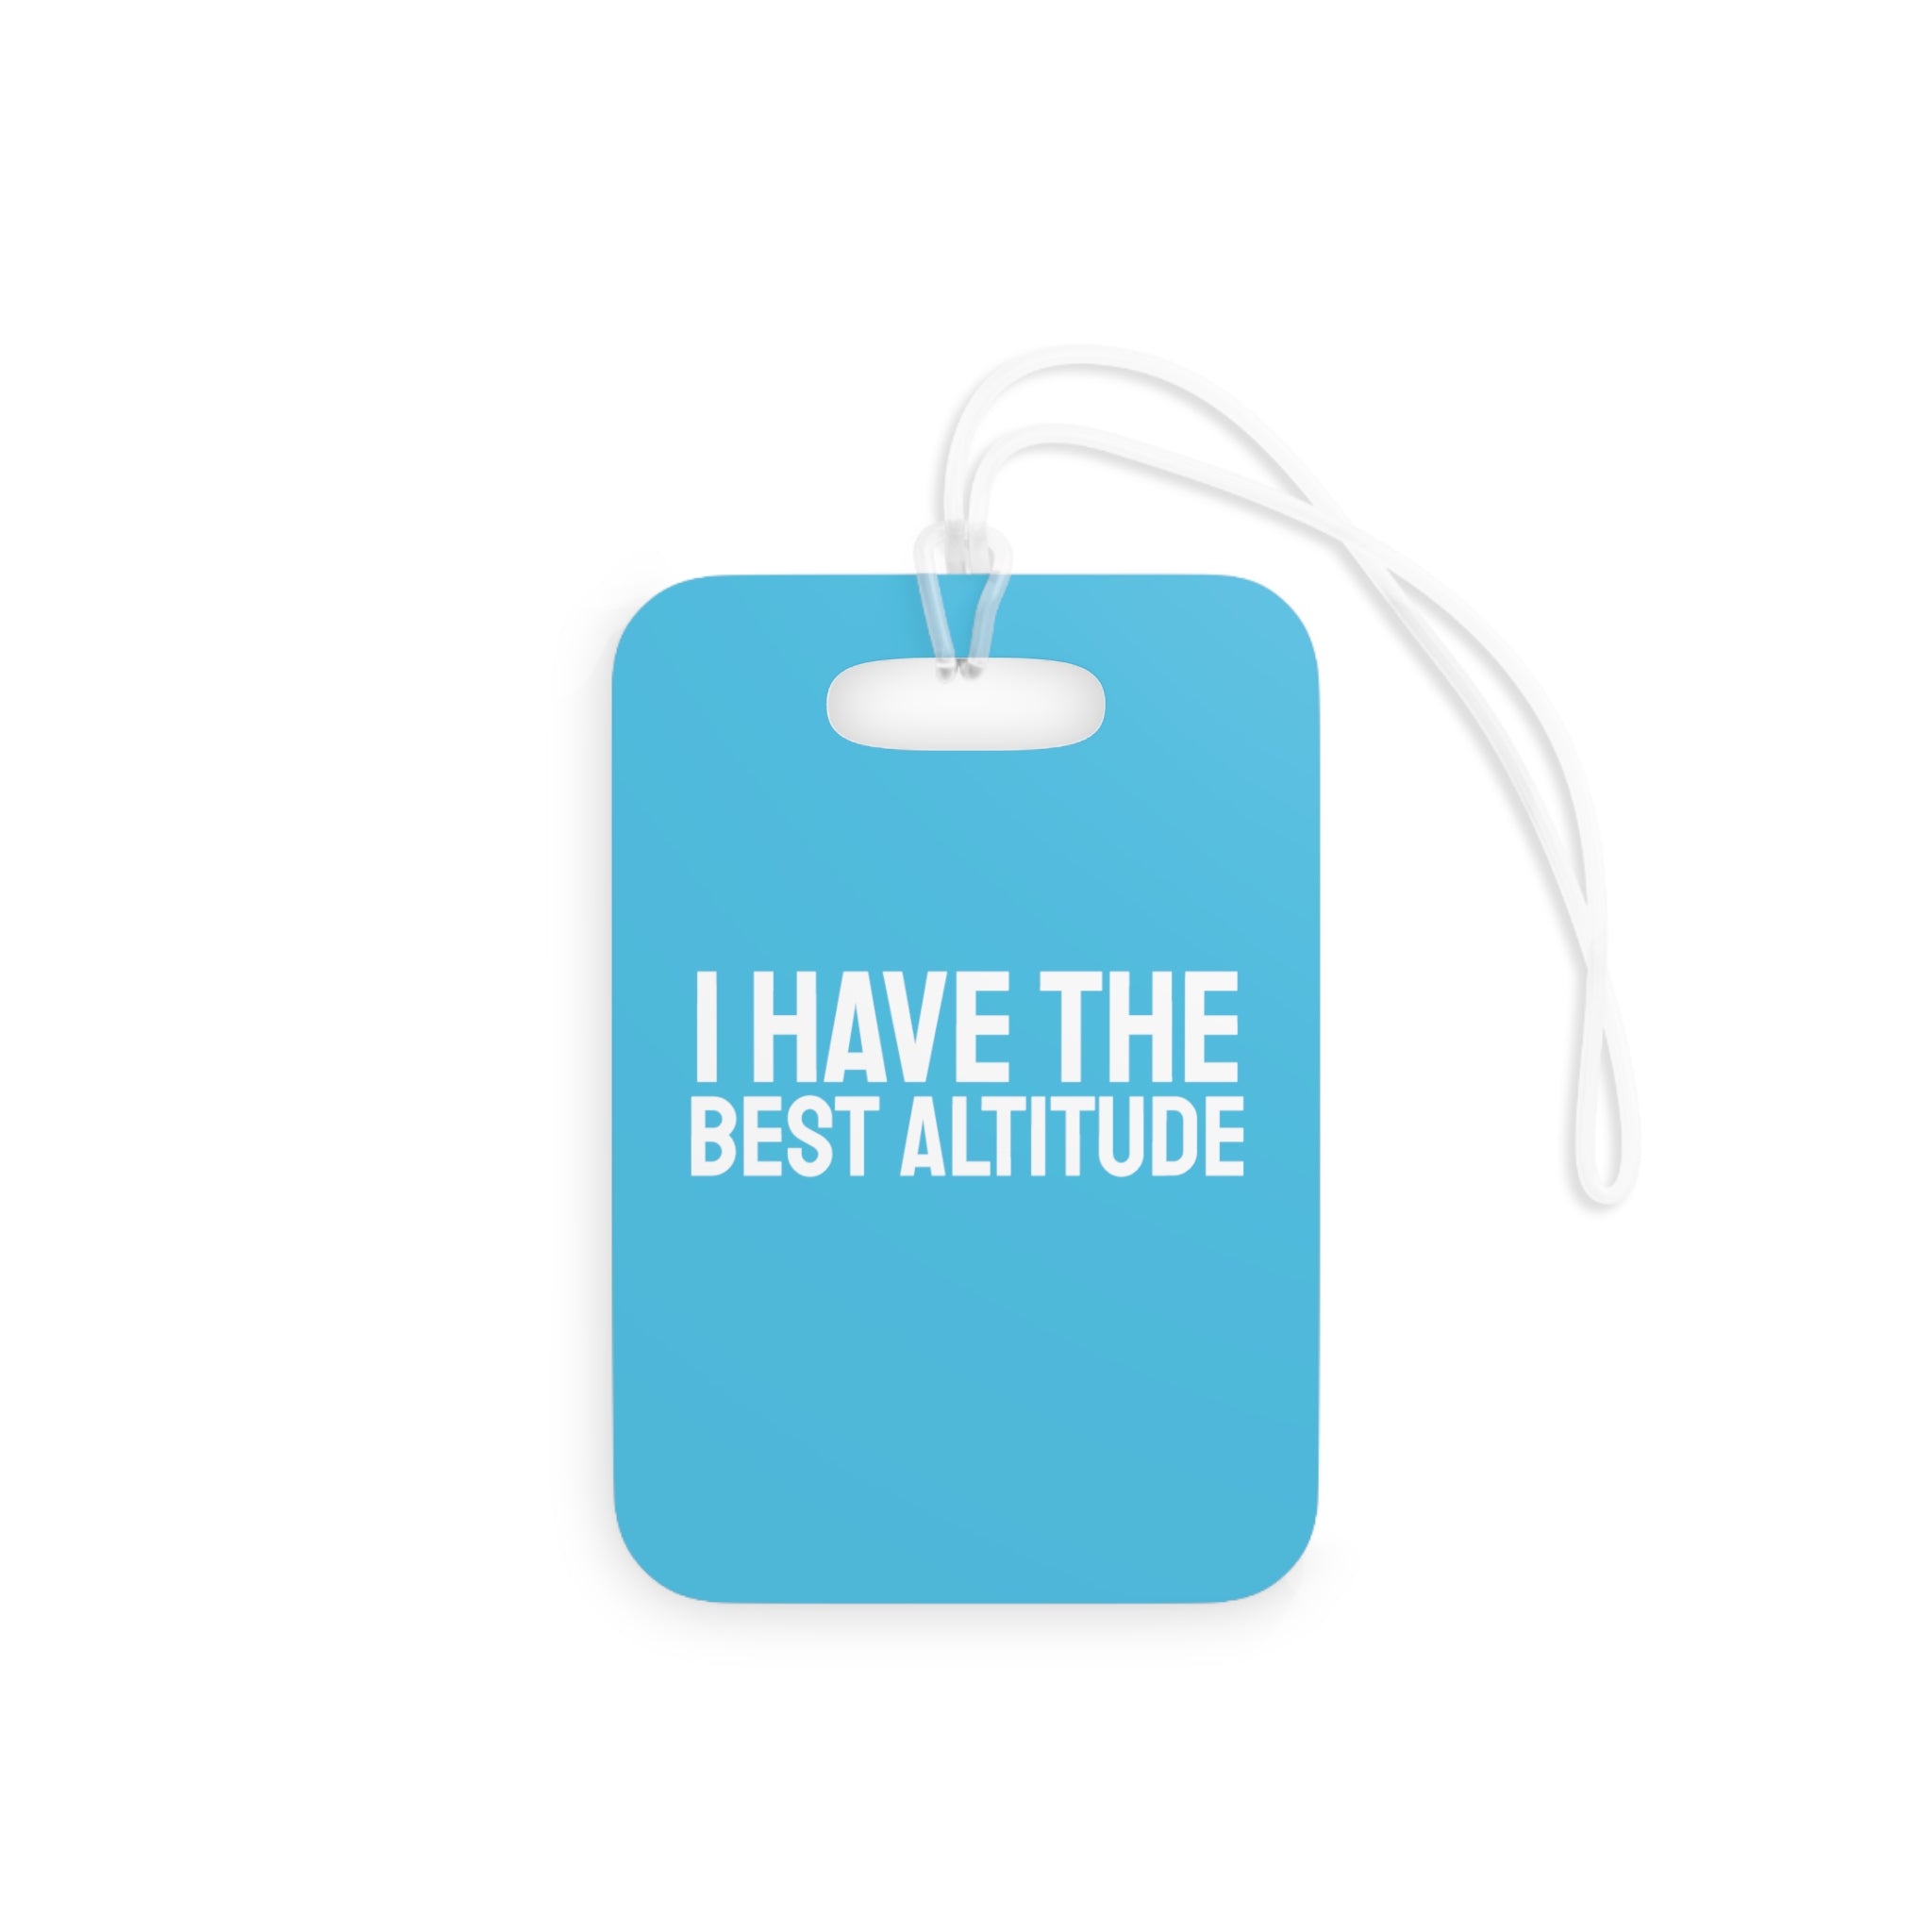 I have the best altitude Luggage Tag (Blue)